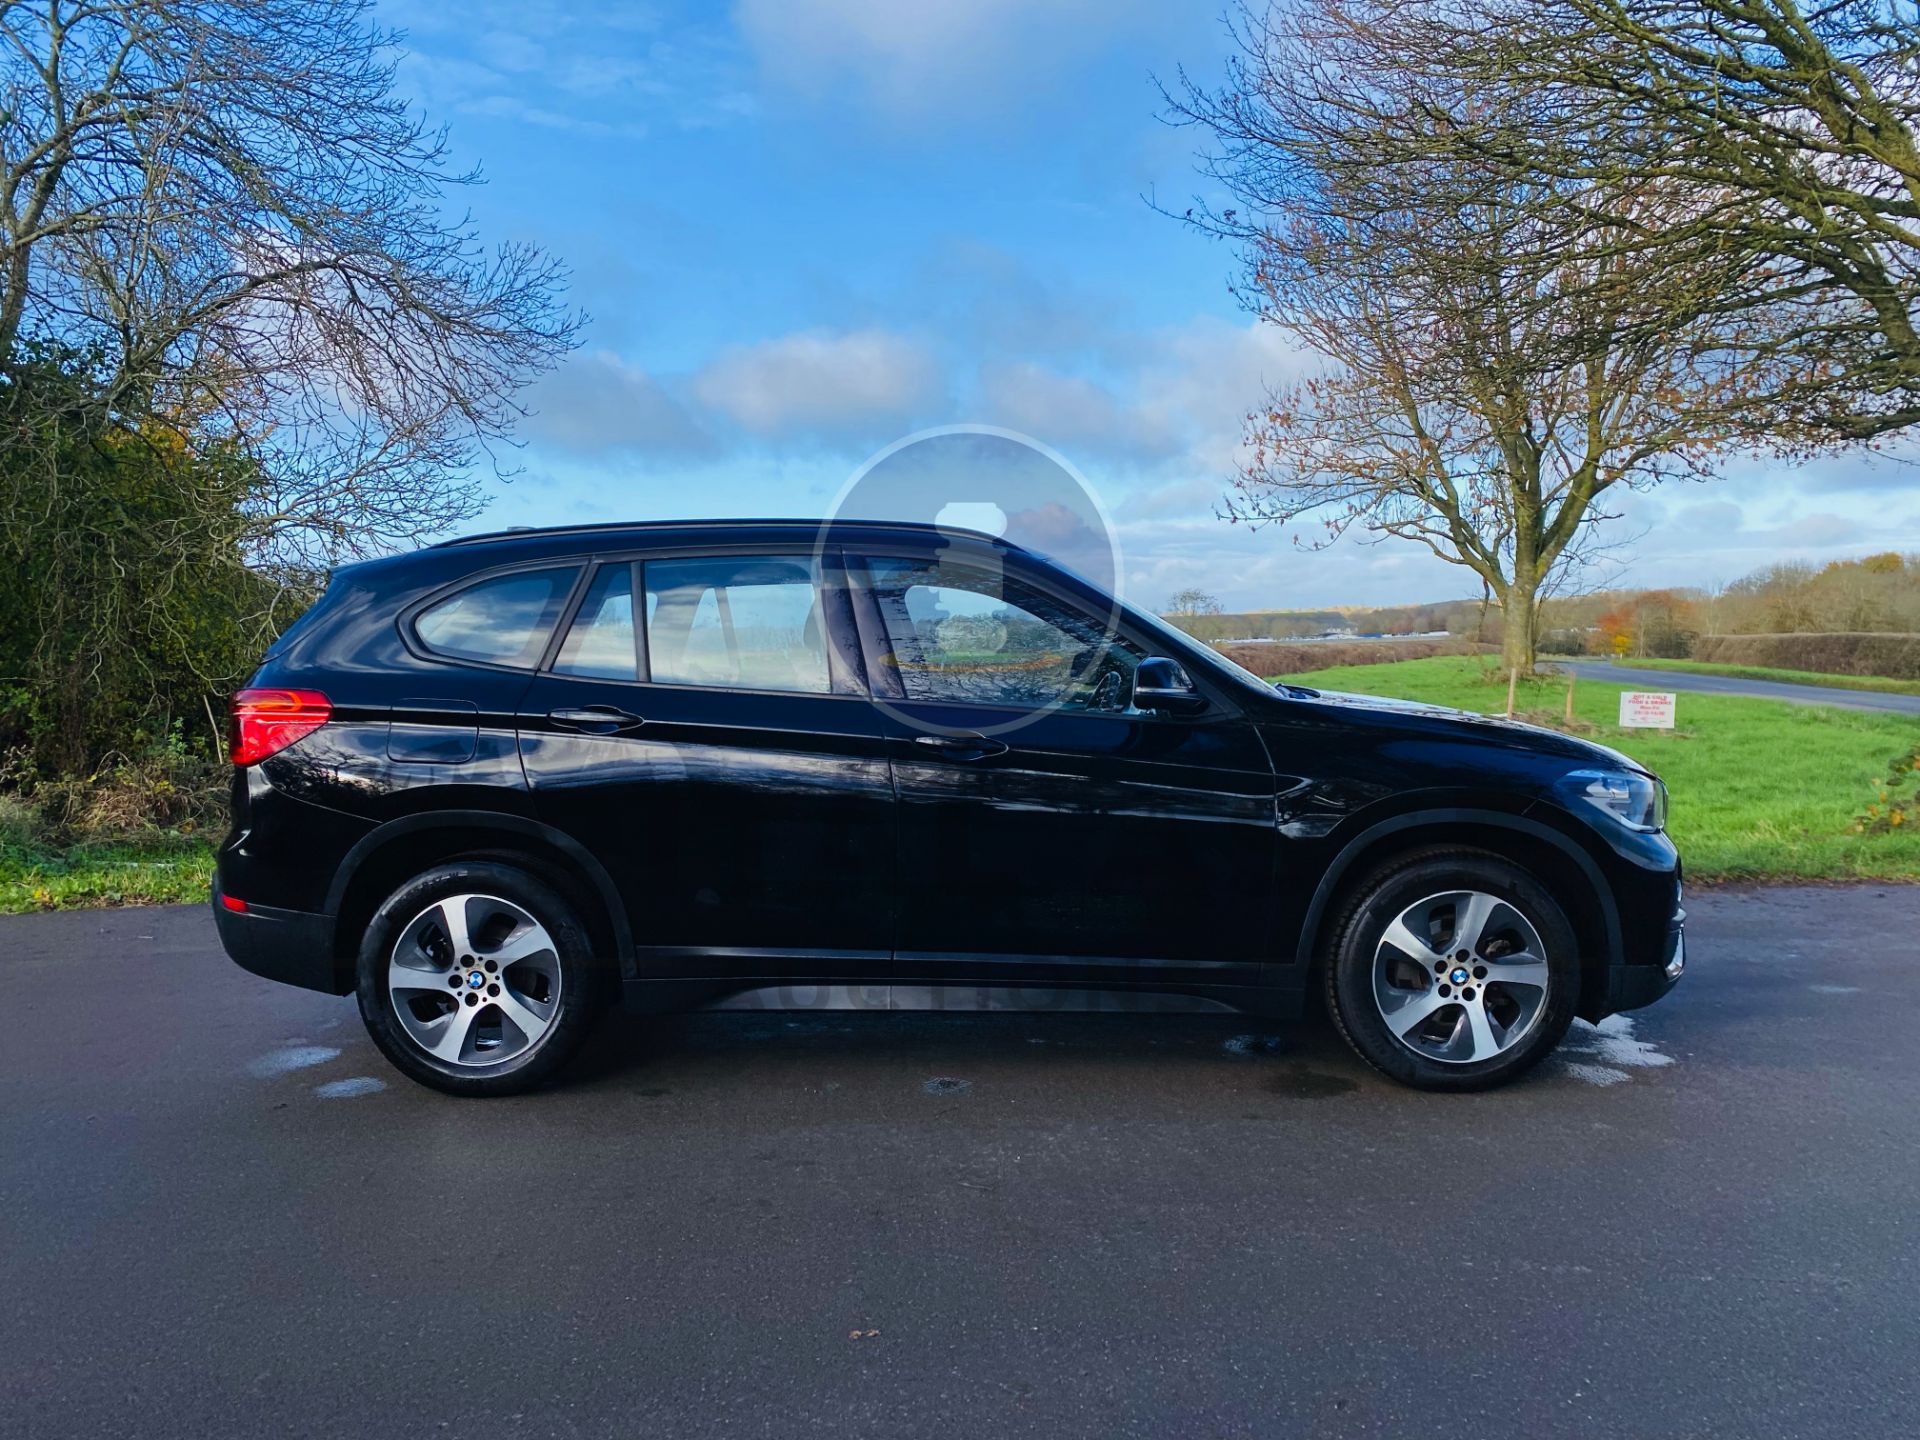 (ON SALE) BMW X1 sDRIVE 18d SE 2.0 DIESEL - 18 REG - 1 OWNER FROM NEW - SAT NAV - AIR CON - - Image 10 of 36